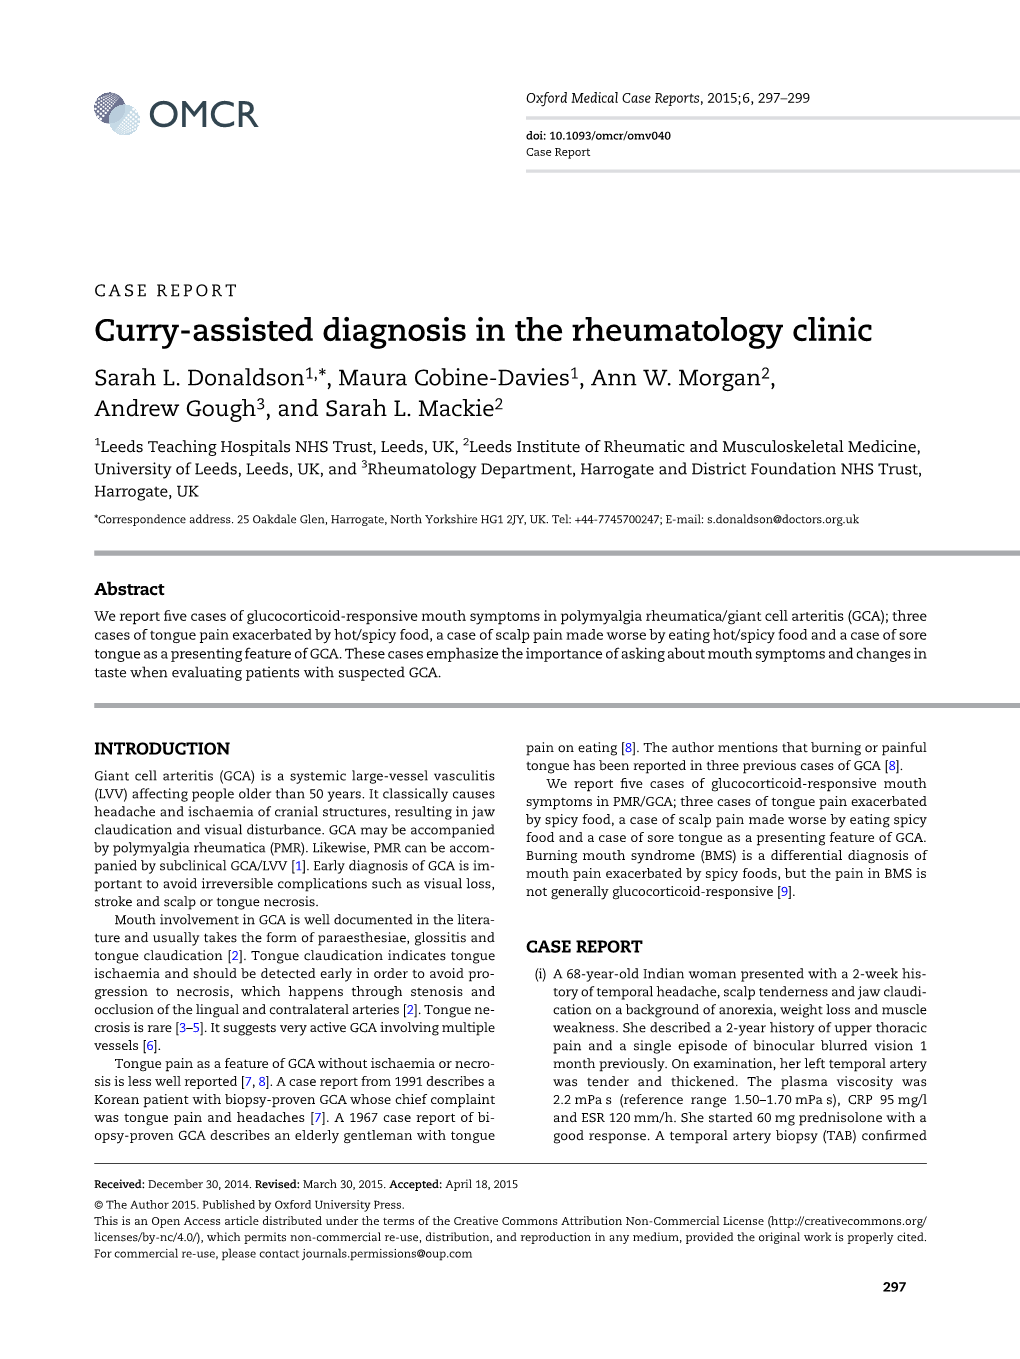 Curry-Assisted Diagnosis in the Rheumatology Clinic Sarah L